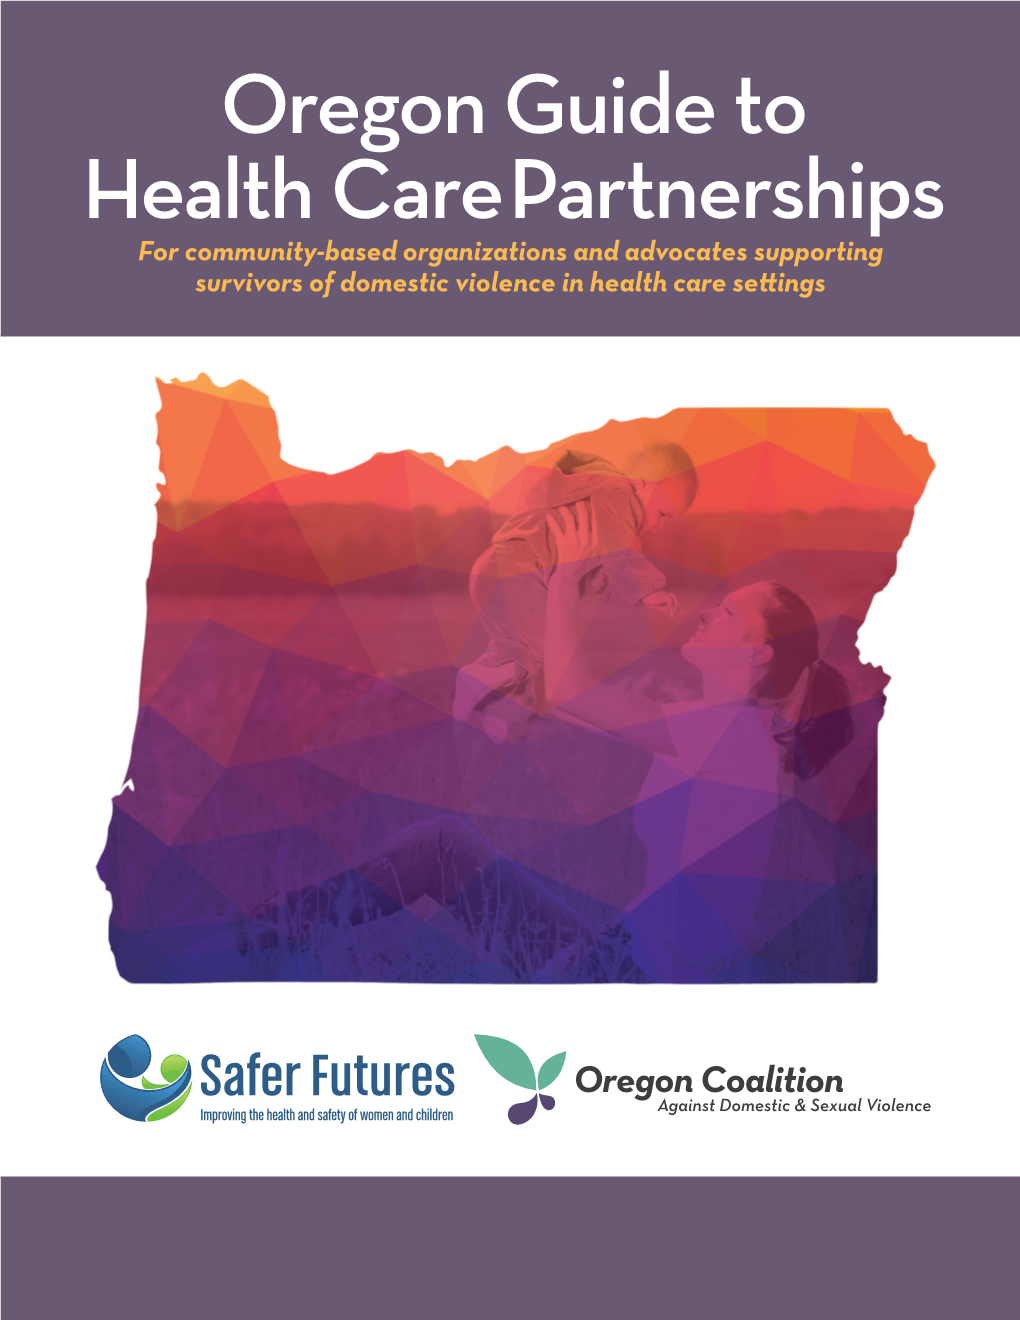 Oregon Guide to Health Care Partnerships for Community-Based Organizations and Advocates Supporting Survivors of Domestic